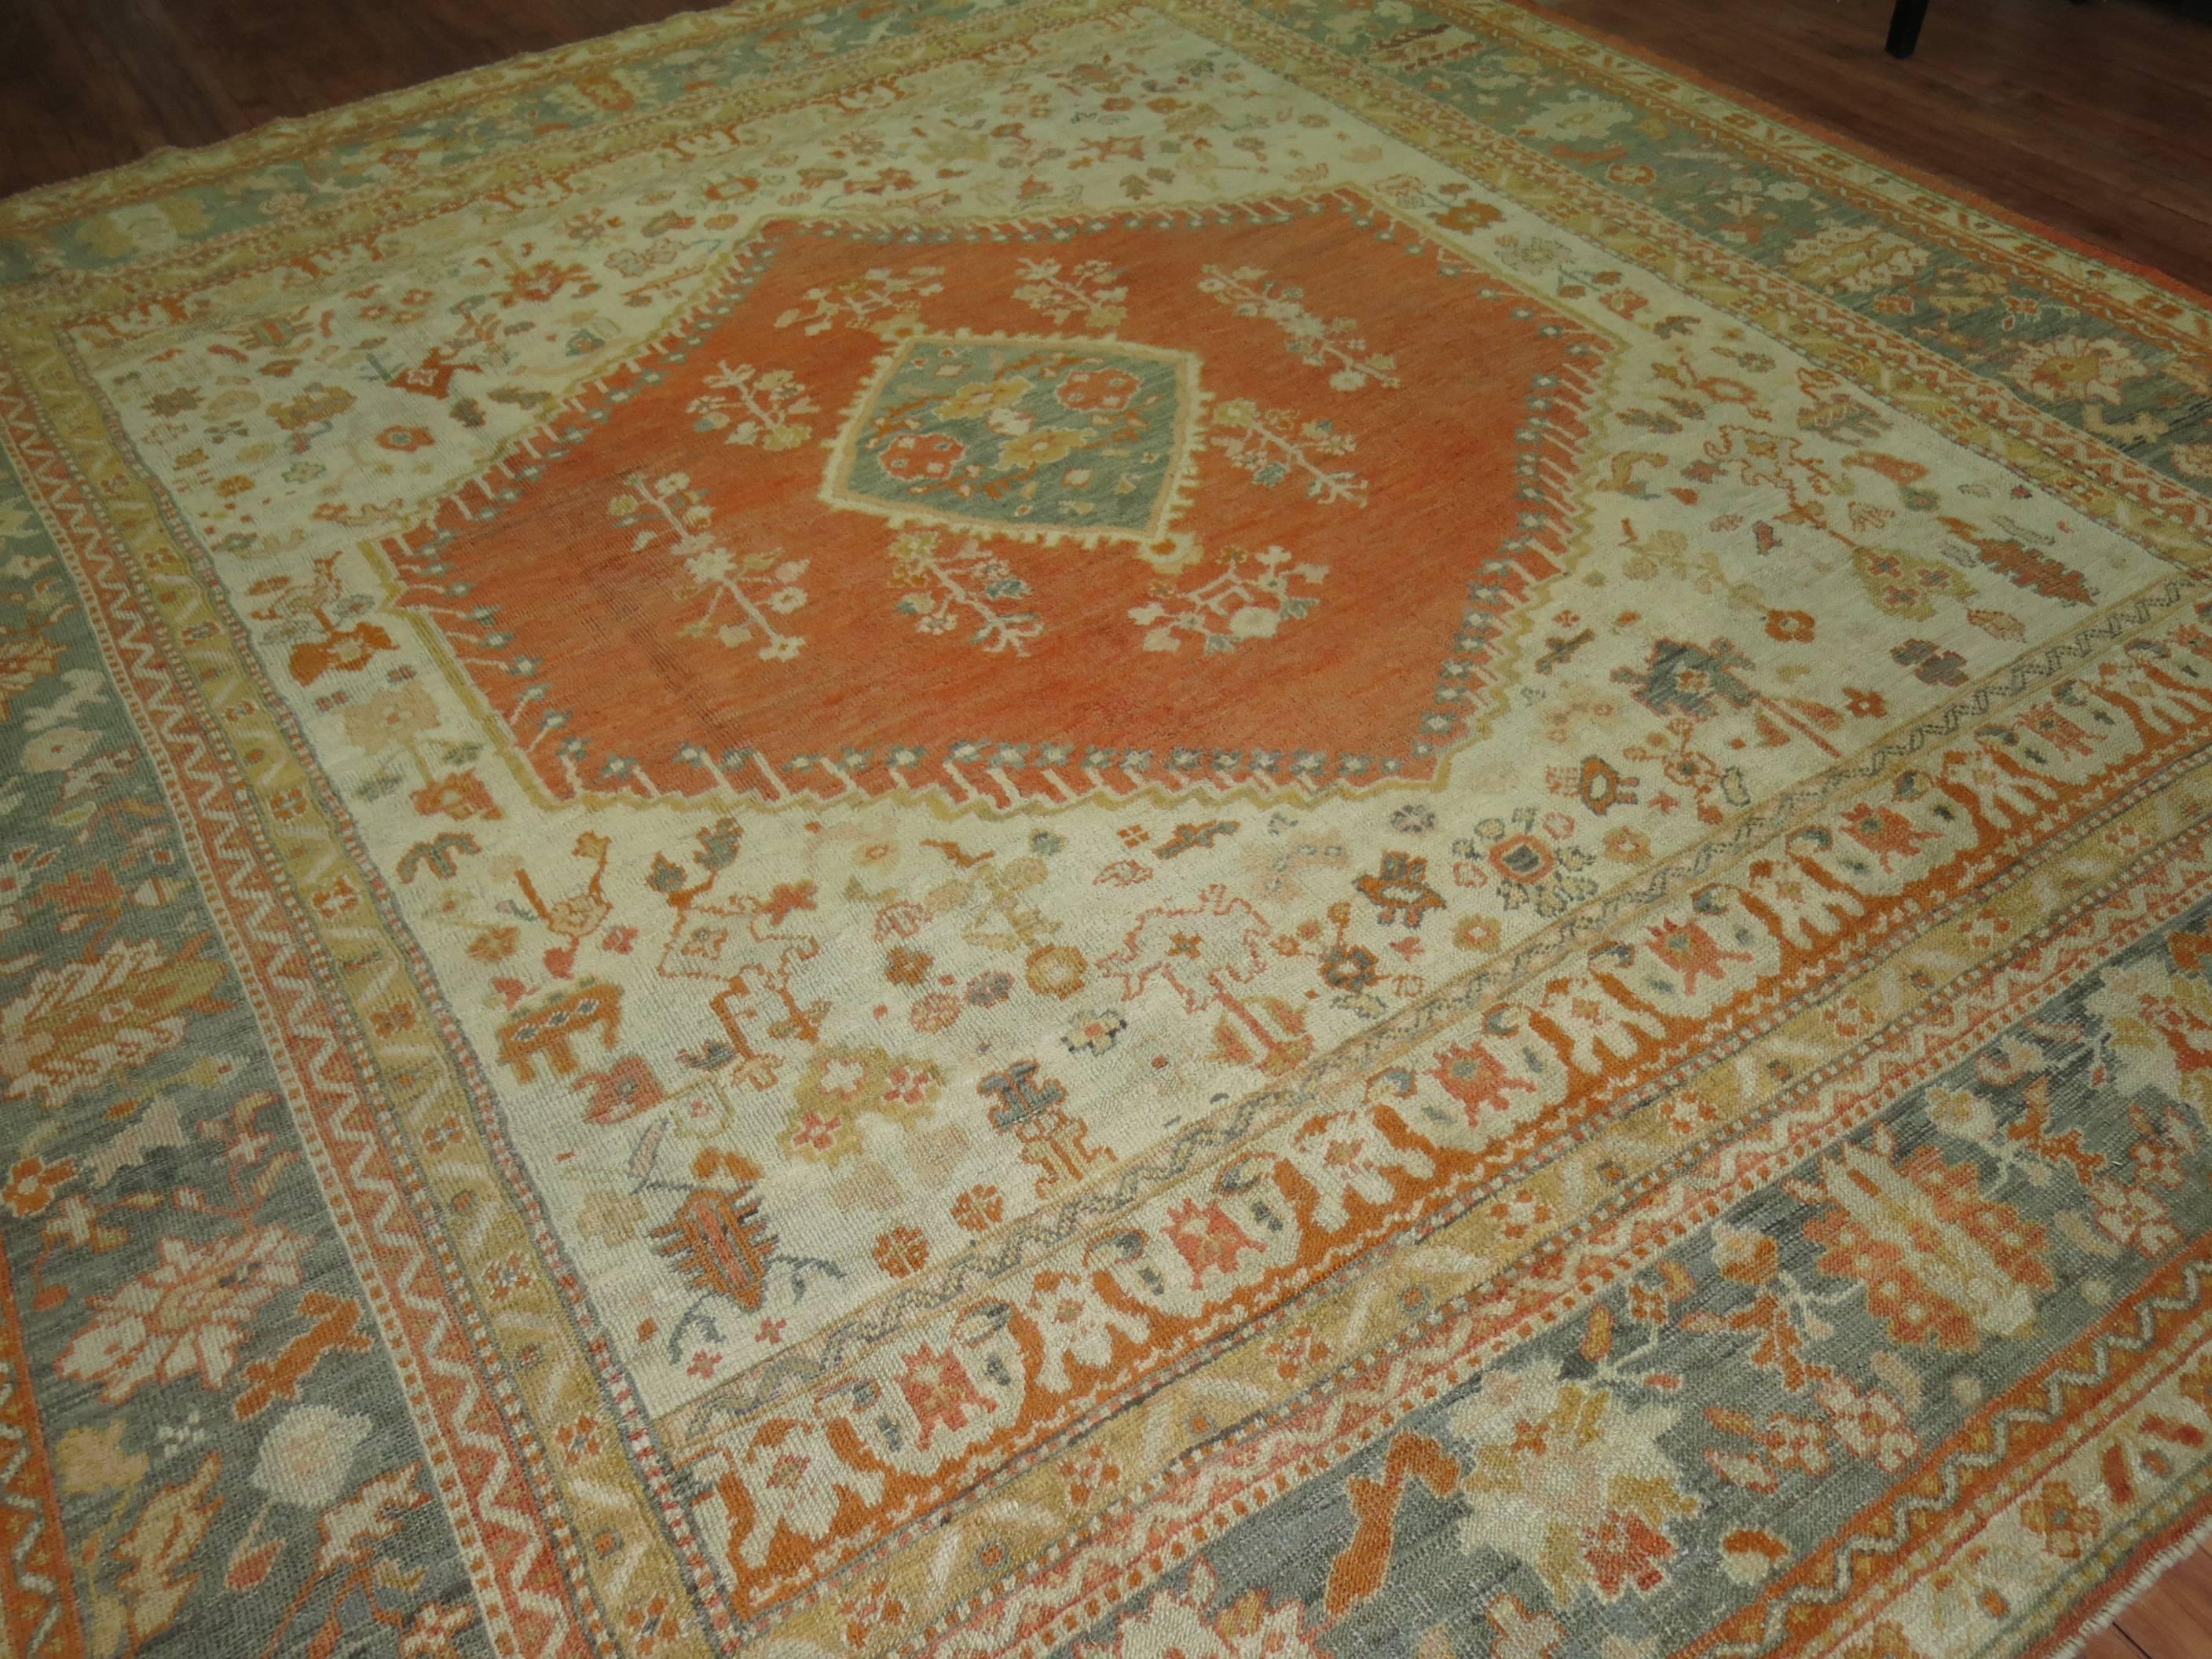 Stunning early 20th century antique Oushak carpet with a medallion covered by an ivory ground and teal border.